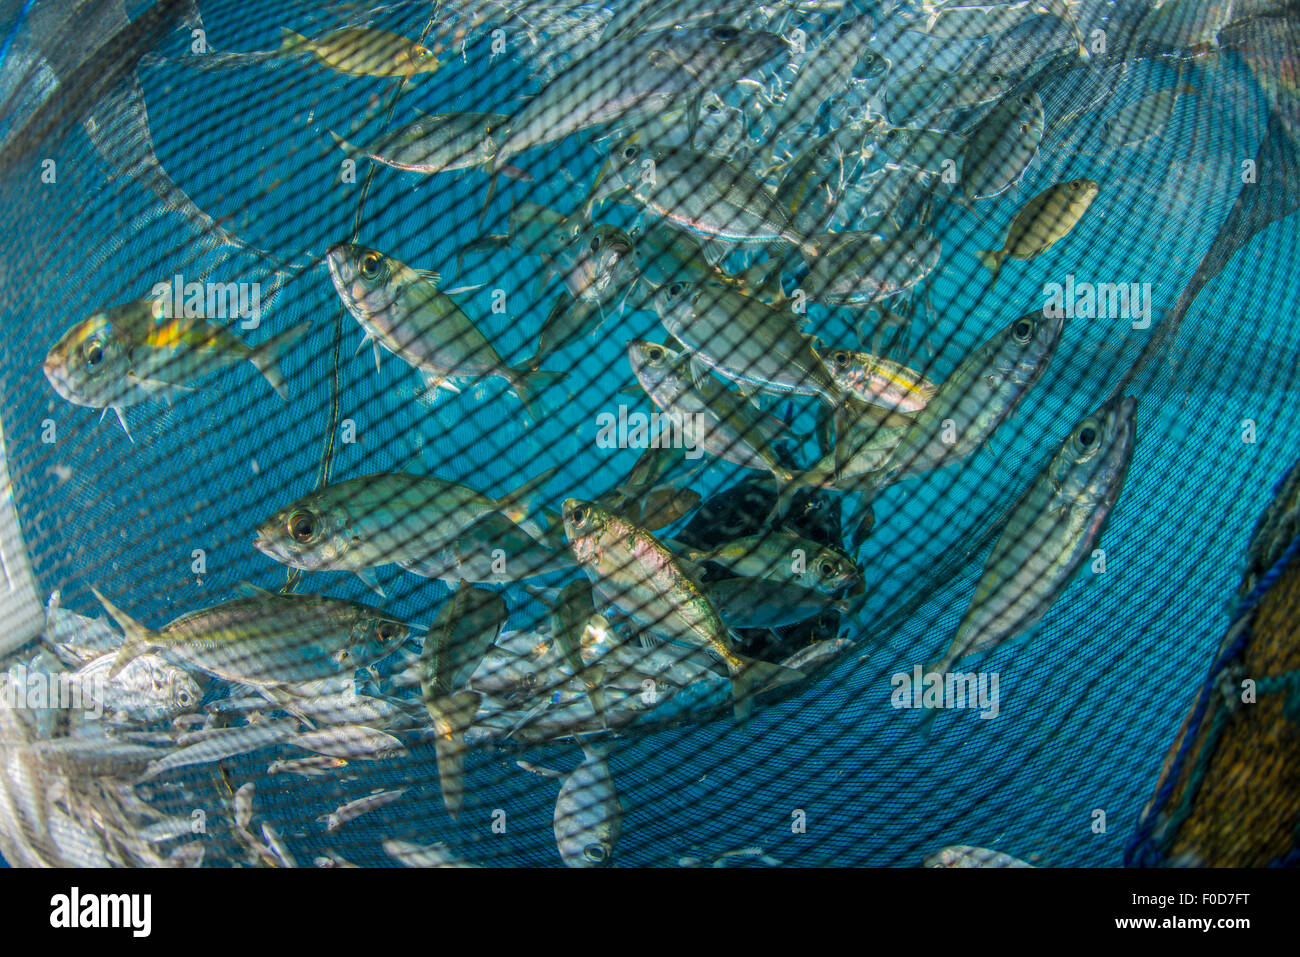 Fishing net with silvery and golden fish inside, Cenderawasih Bay